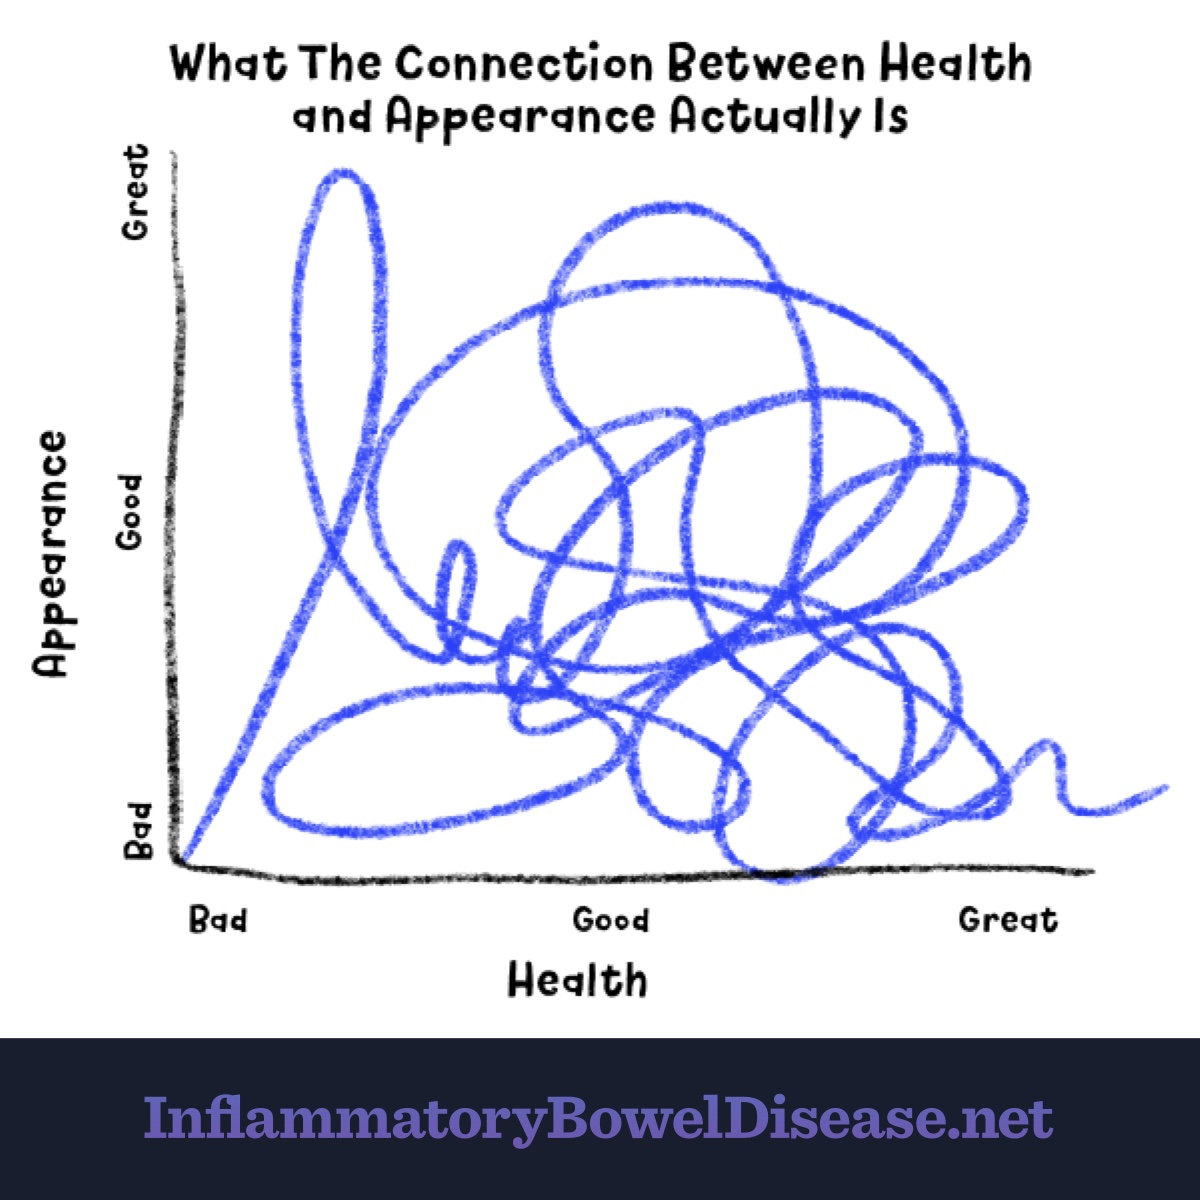 The connection between health and appearance is actually not linear and is drawn out on this graph as a line moving all over the place.